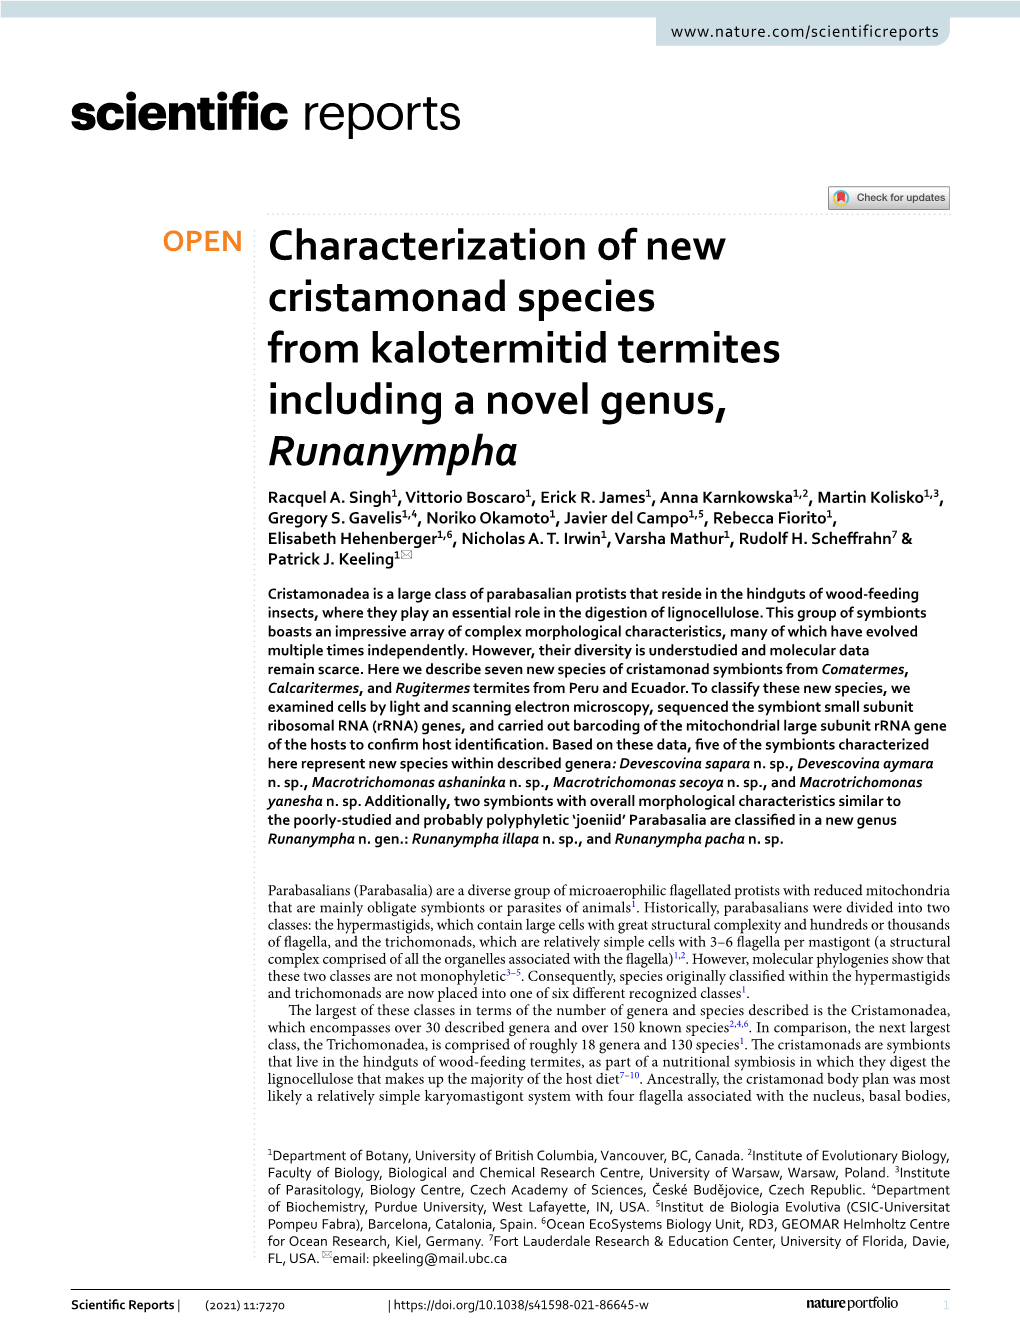 Characterization of New Cristamonad Species from Kalotermitid Termites Including a Novel Genus, Runanympha Racquel A